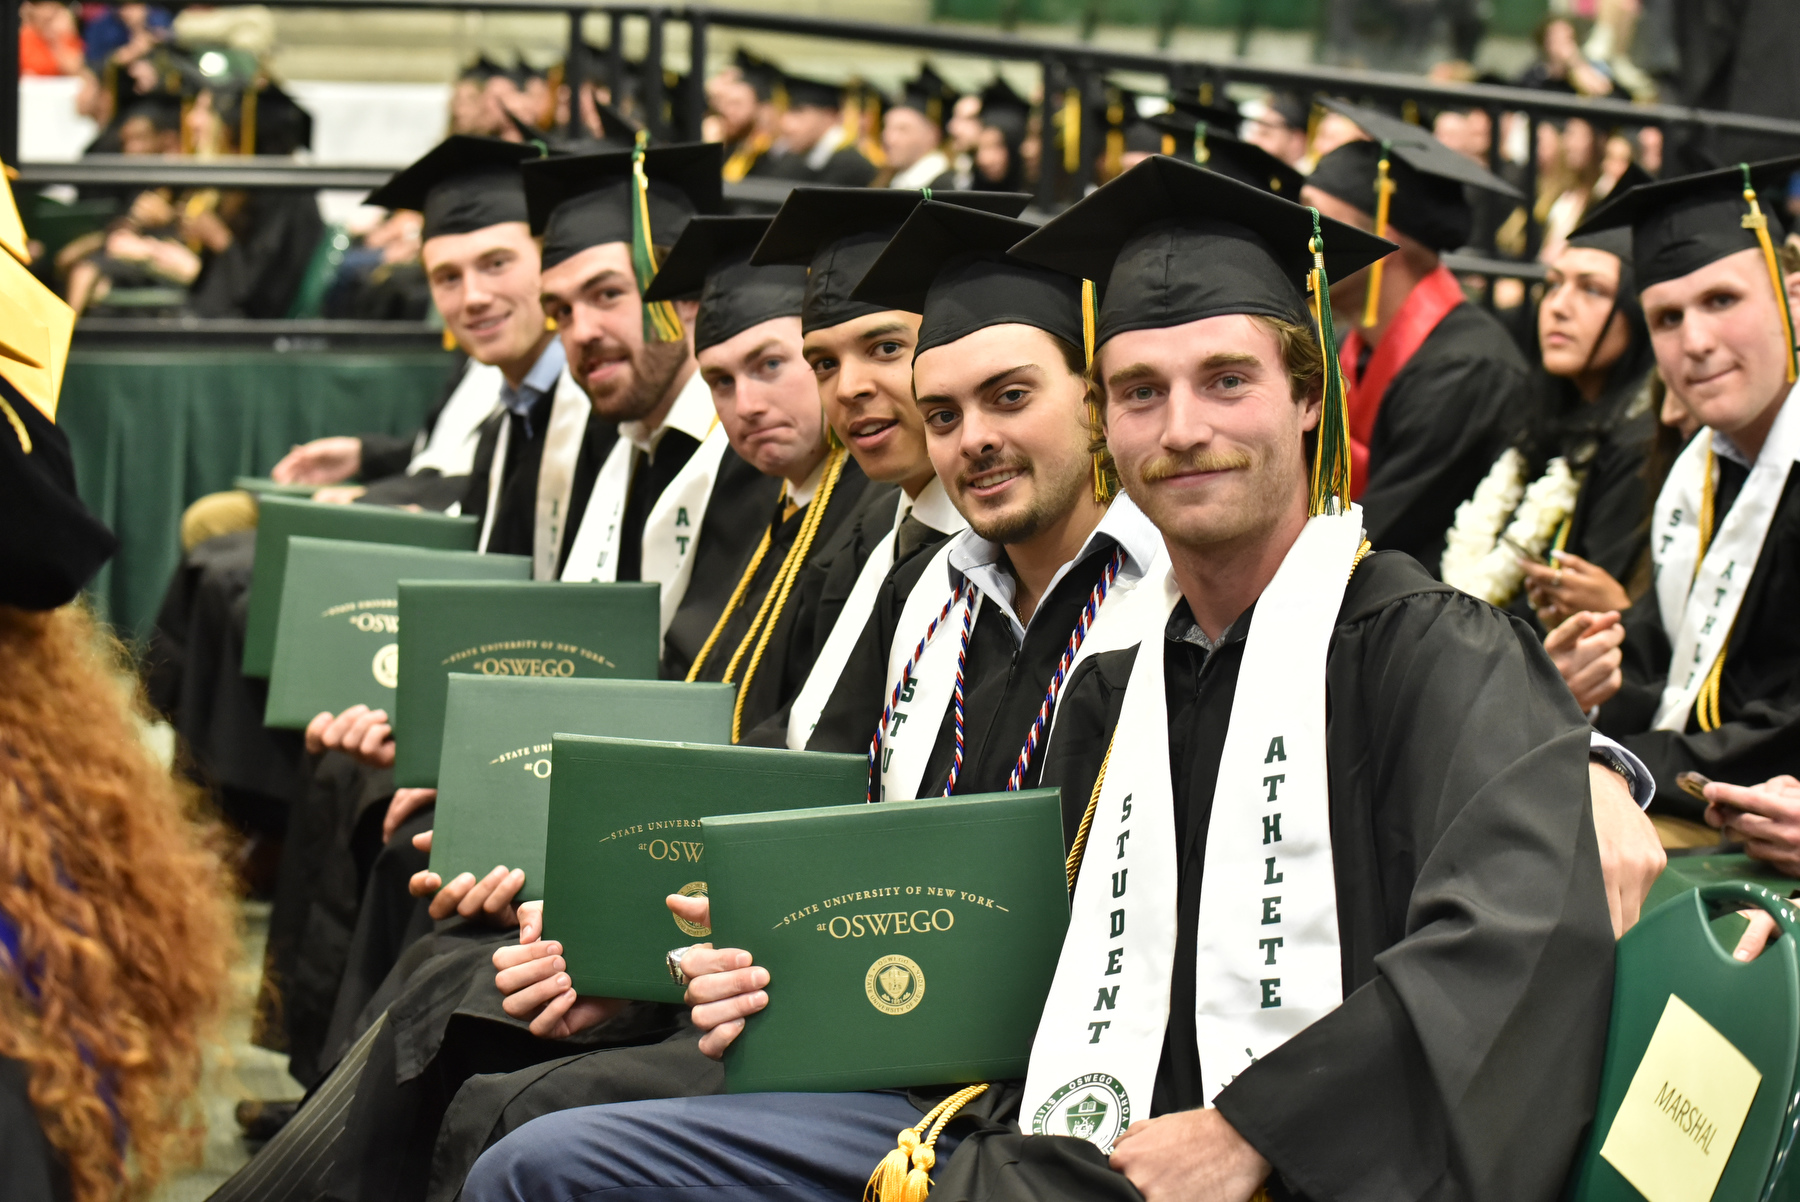 Graduating Laker student-athletes reach the finish line of their undergraduate time during the School of Business ceremony.